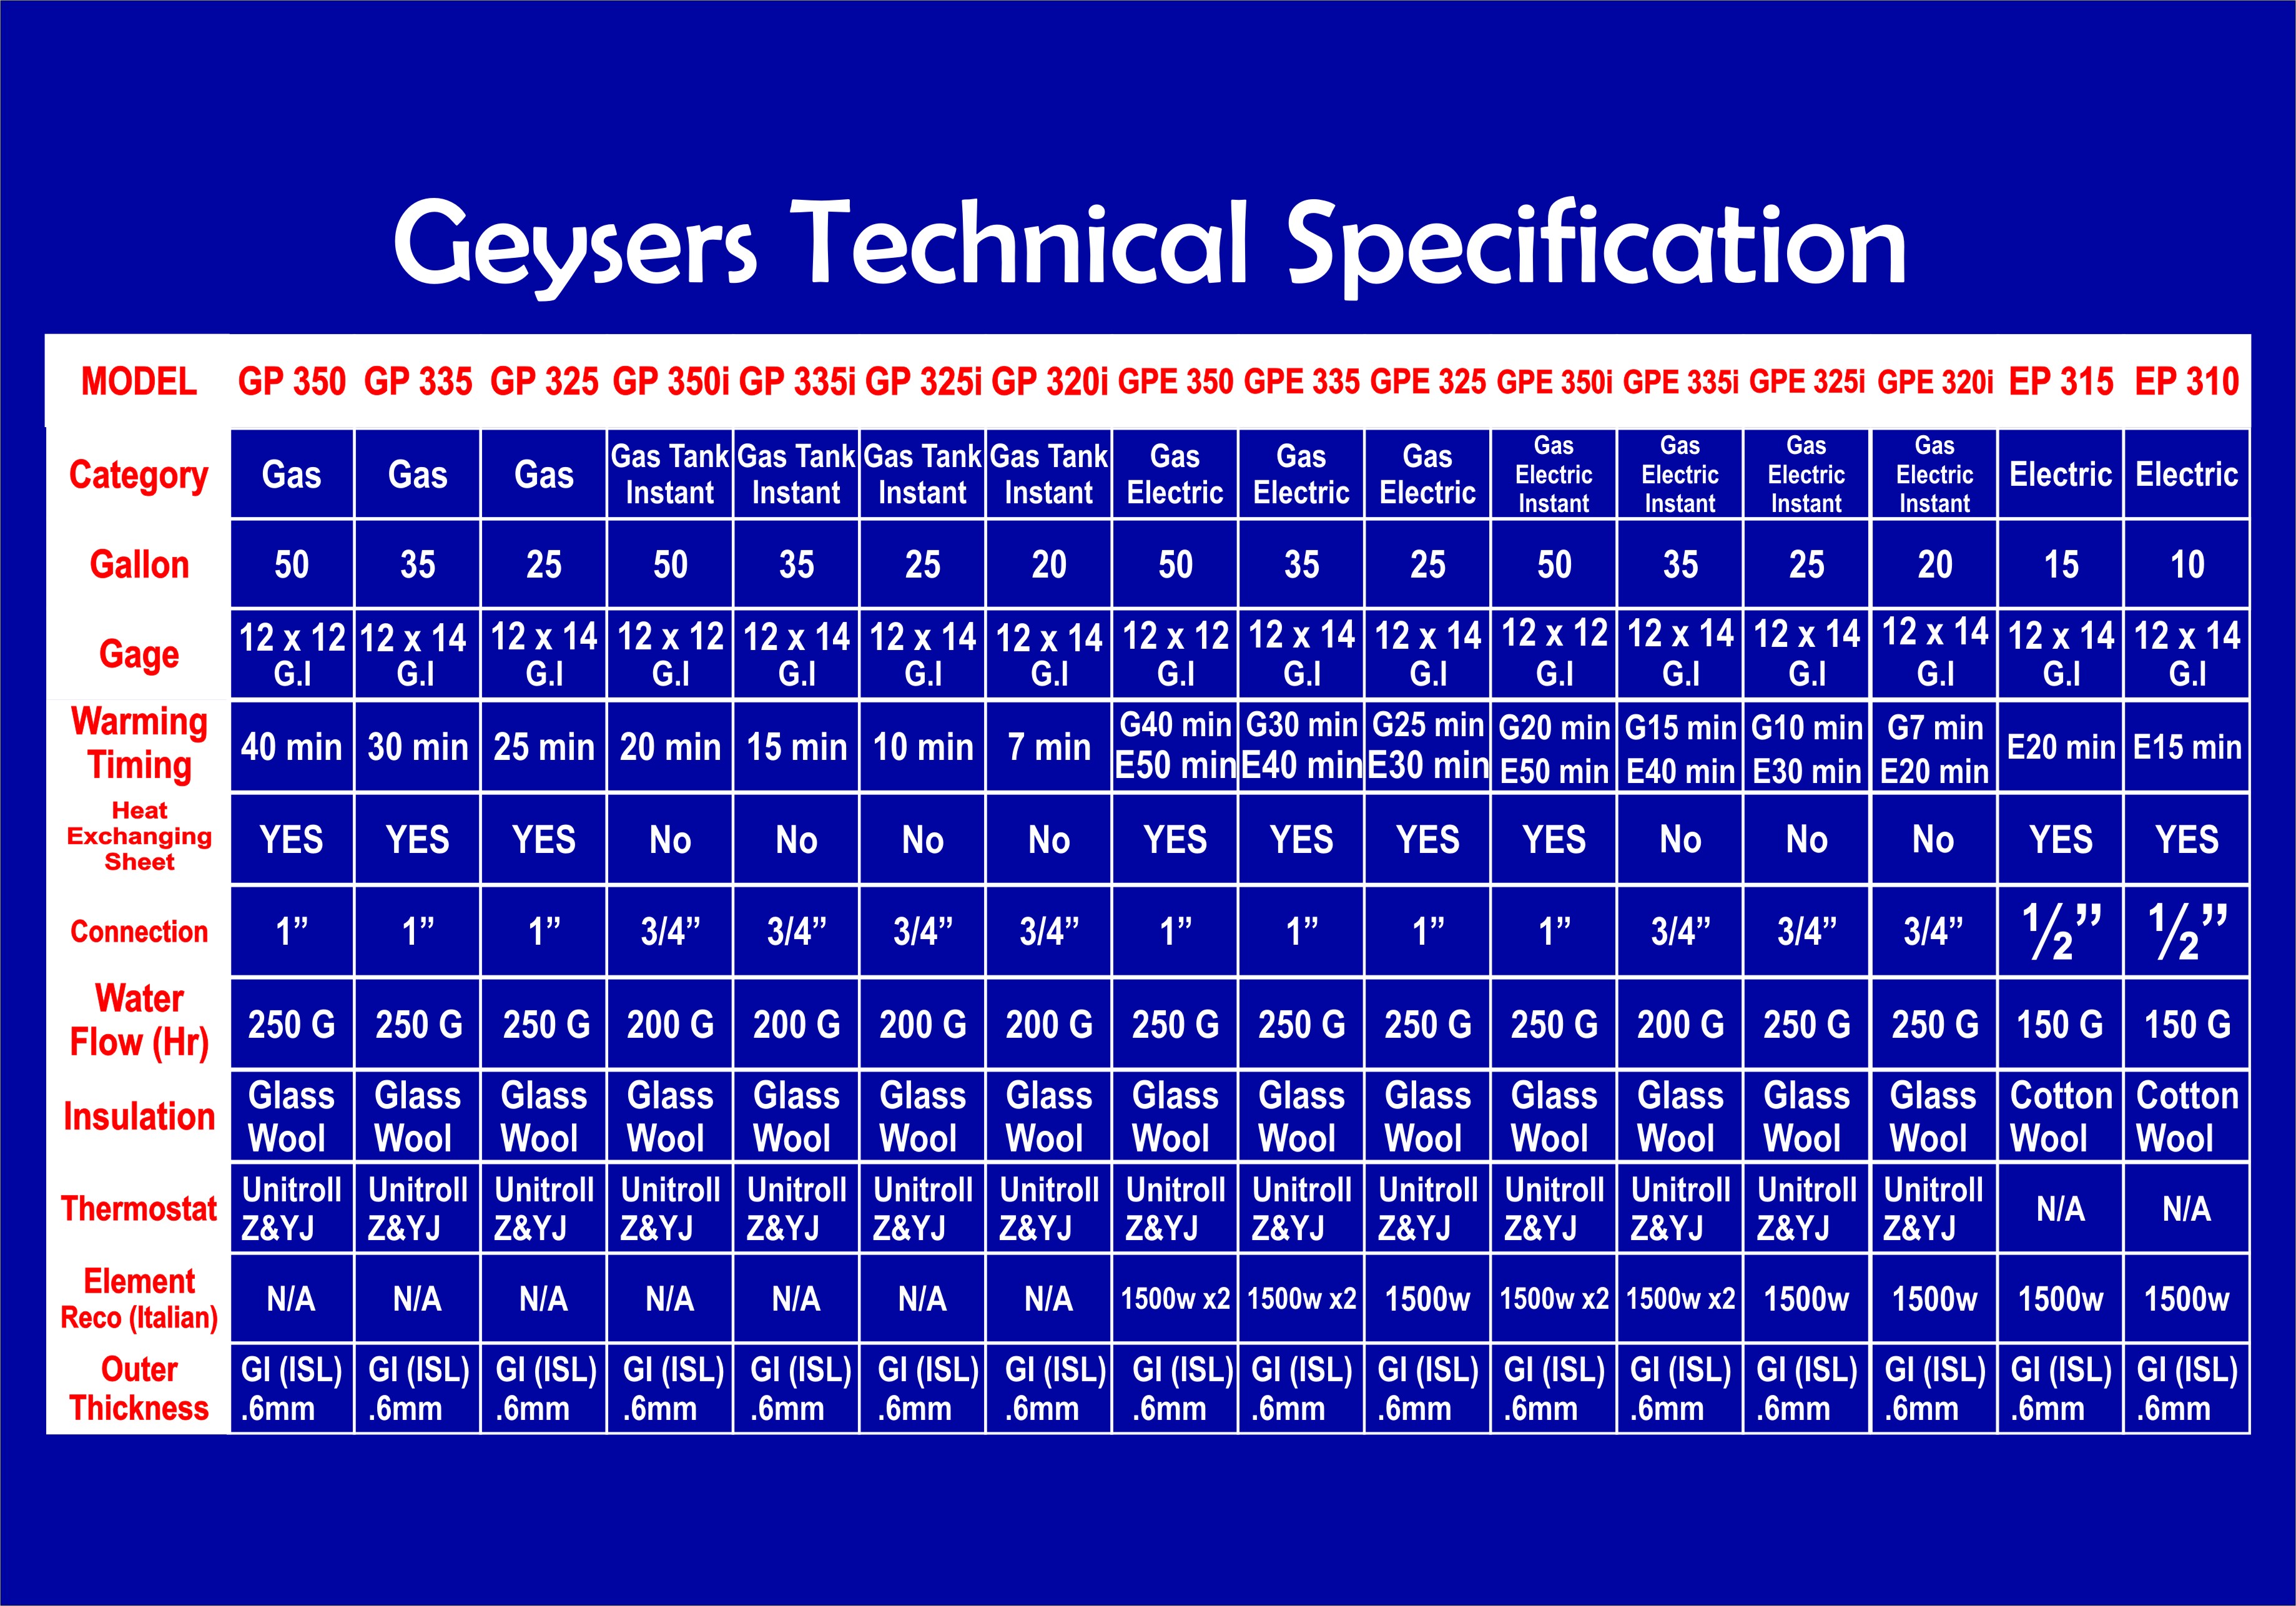 Geyser Technical Specification 